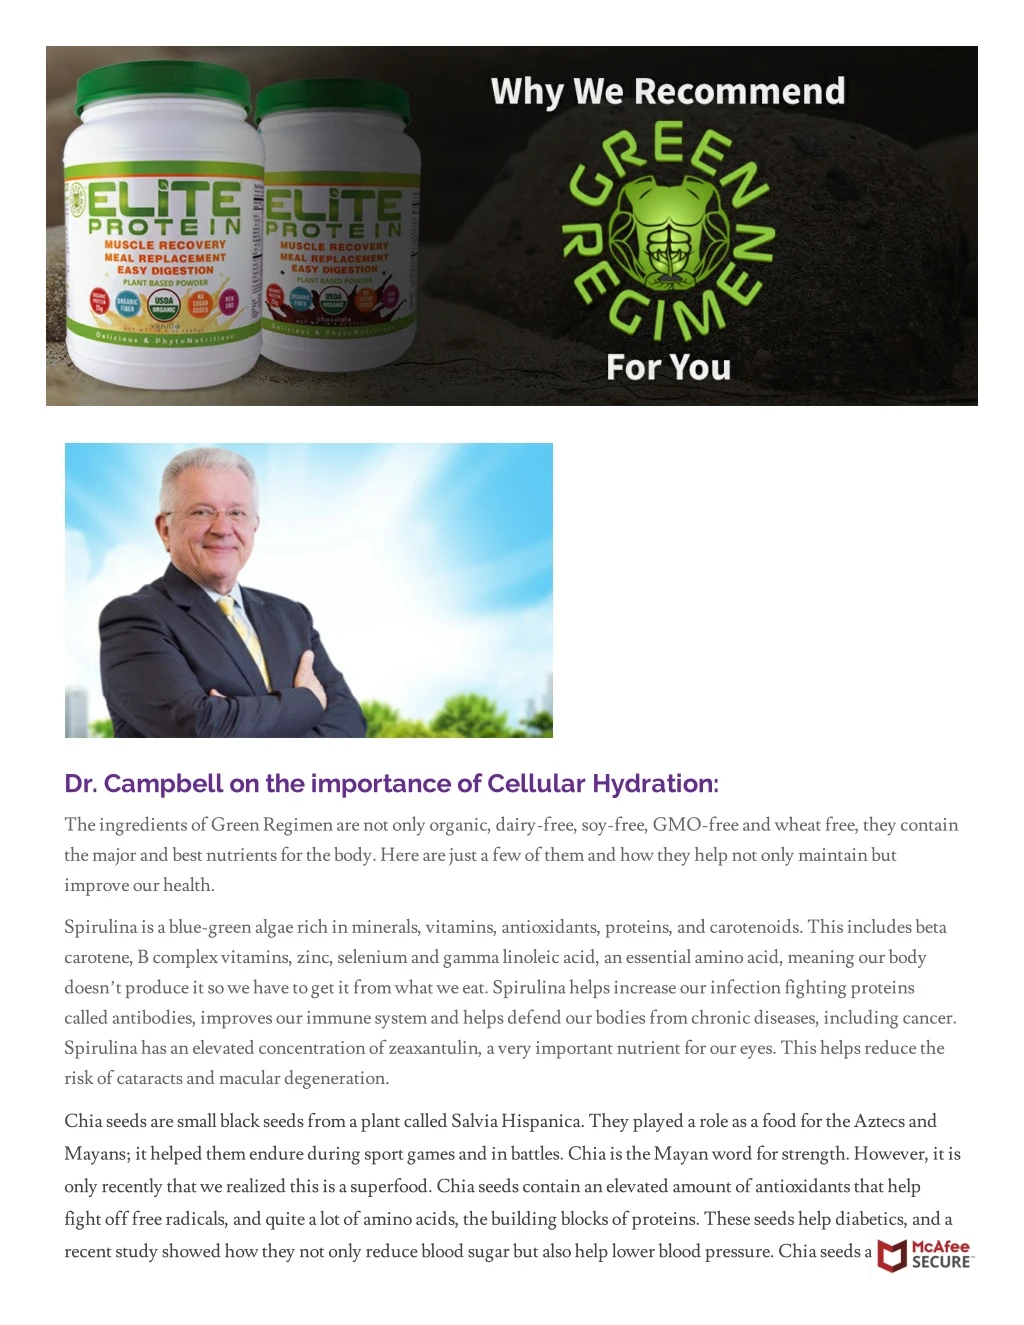 dr campbell on the importance of cellular